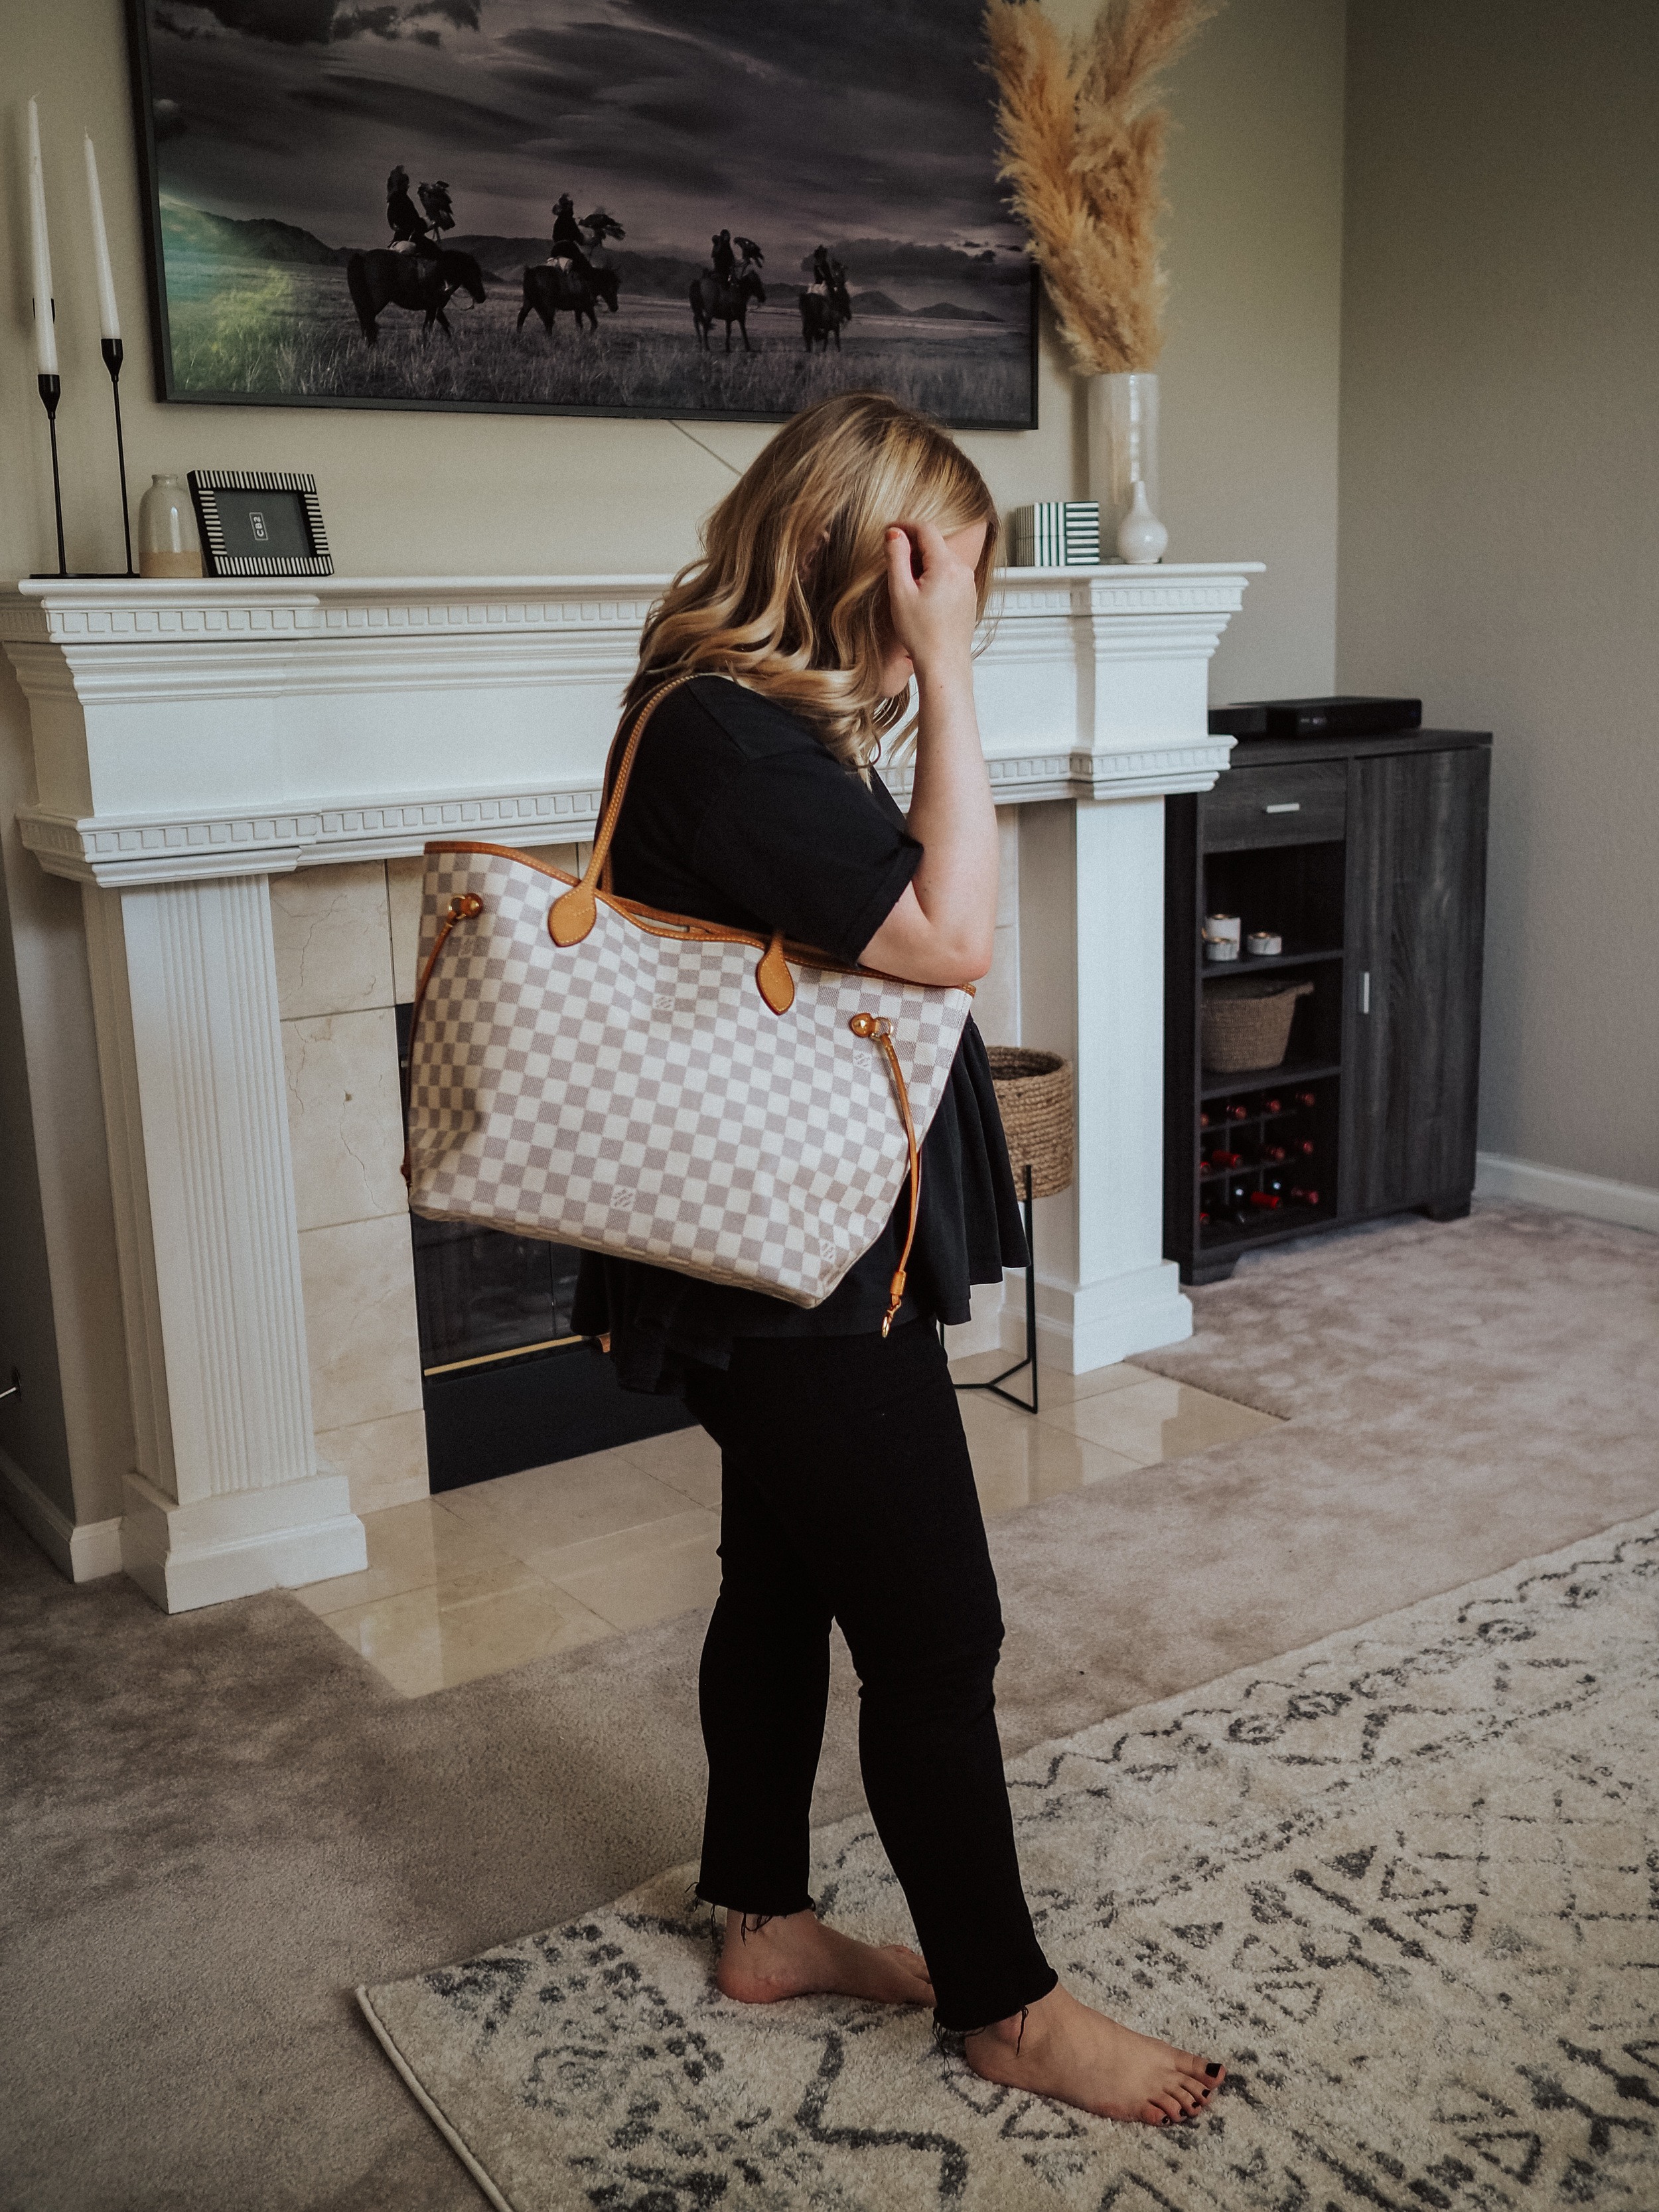 Kelsey from Blondes & Bagels reviews both the MM and GM sizes of the Louis Vuitton Neverfull. Find out if these designer bags are worth it.